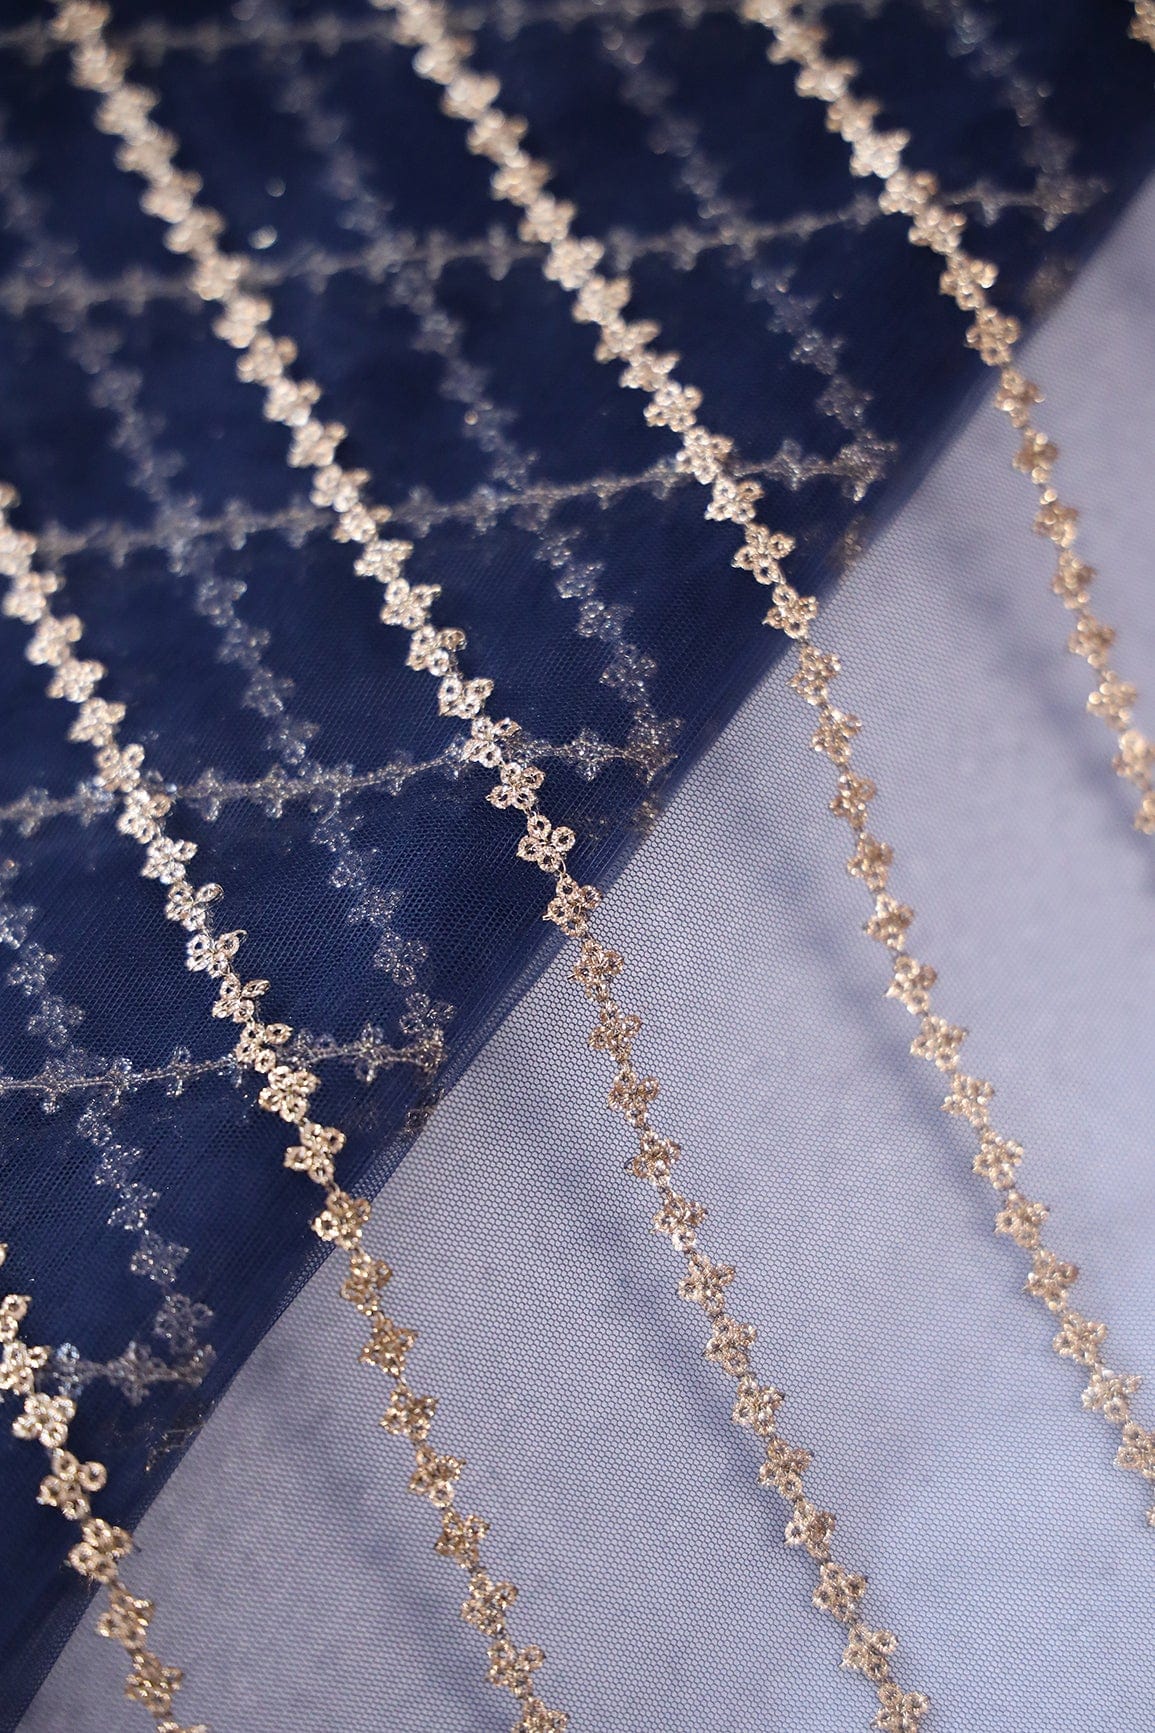 doeraa Embroidery Fabrics Gold Sequins With Gold Zari Stripes Embroidery Work On Navy Blue Soft Net Fabric